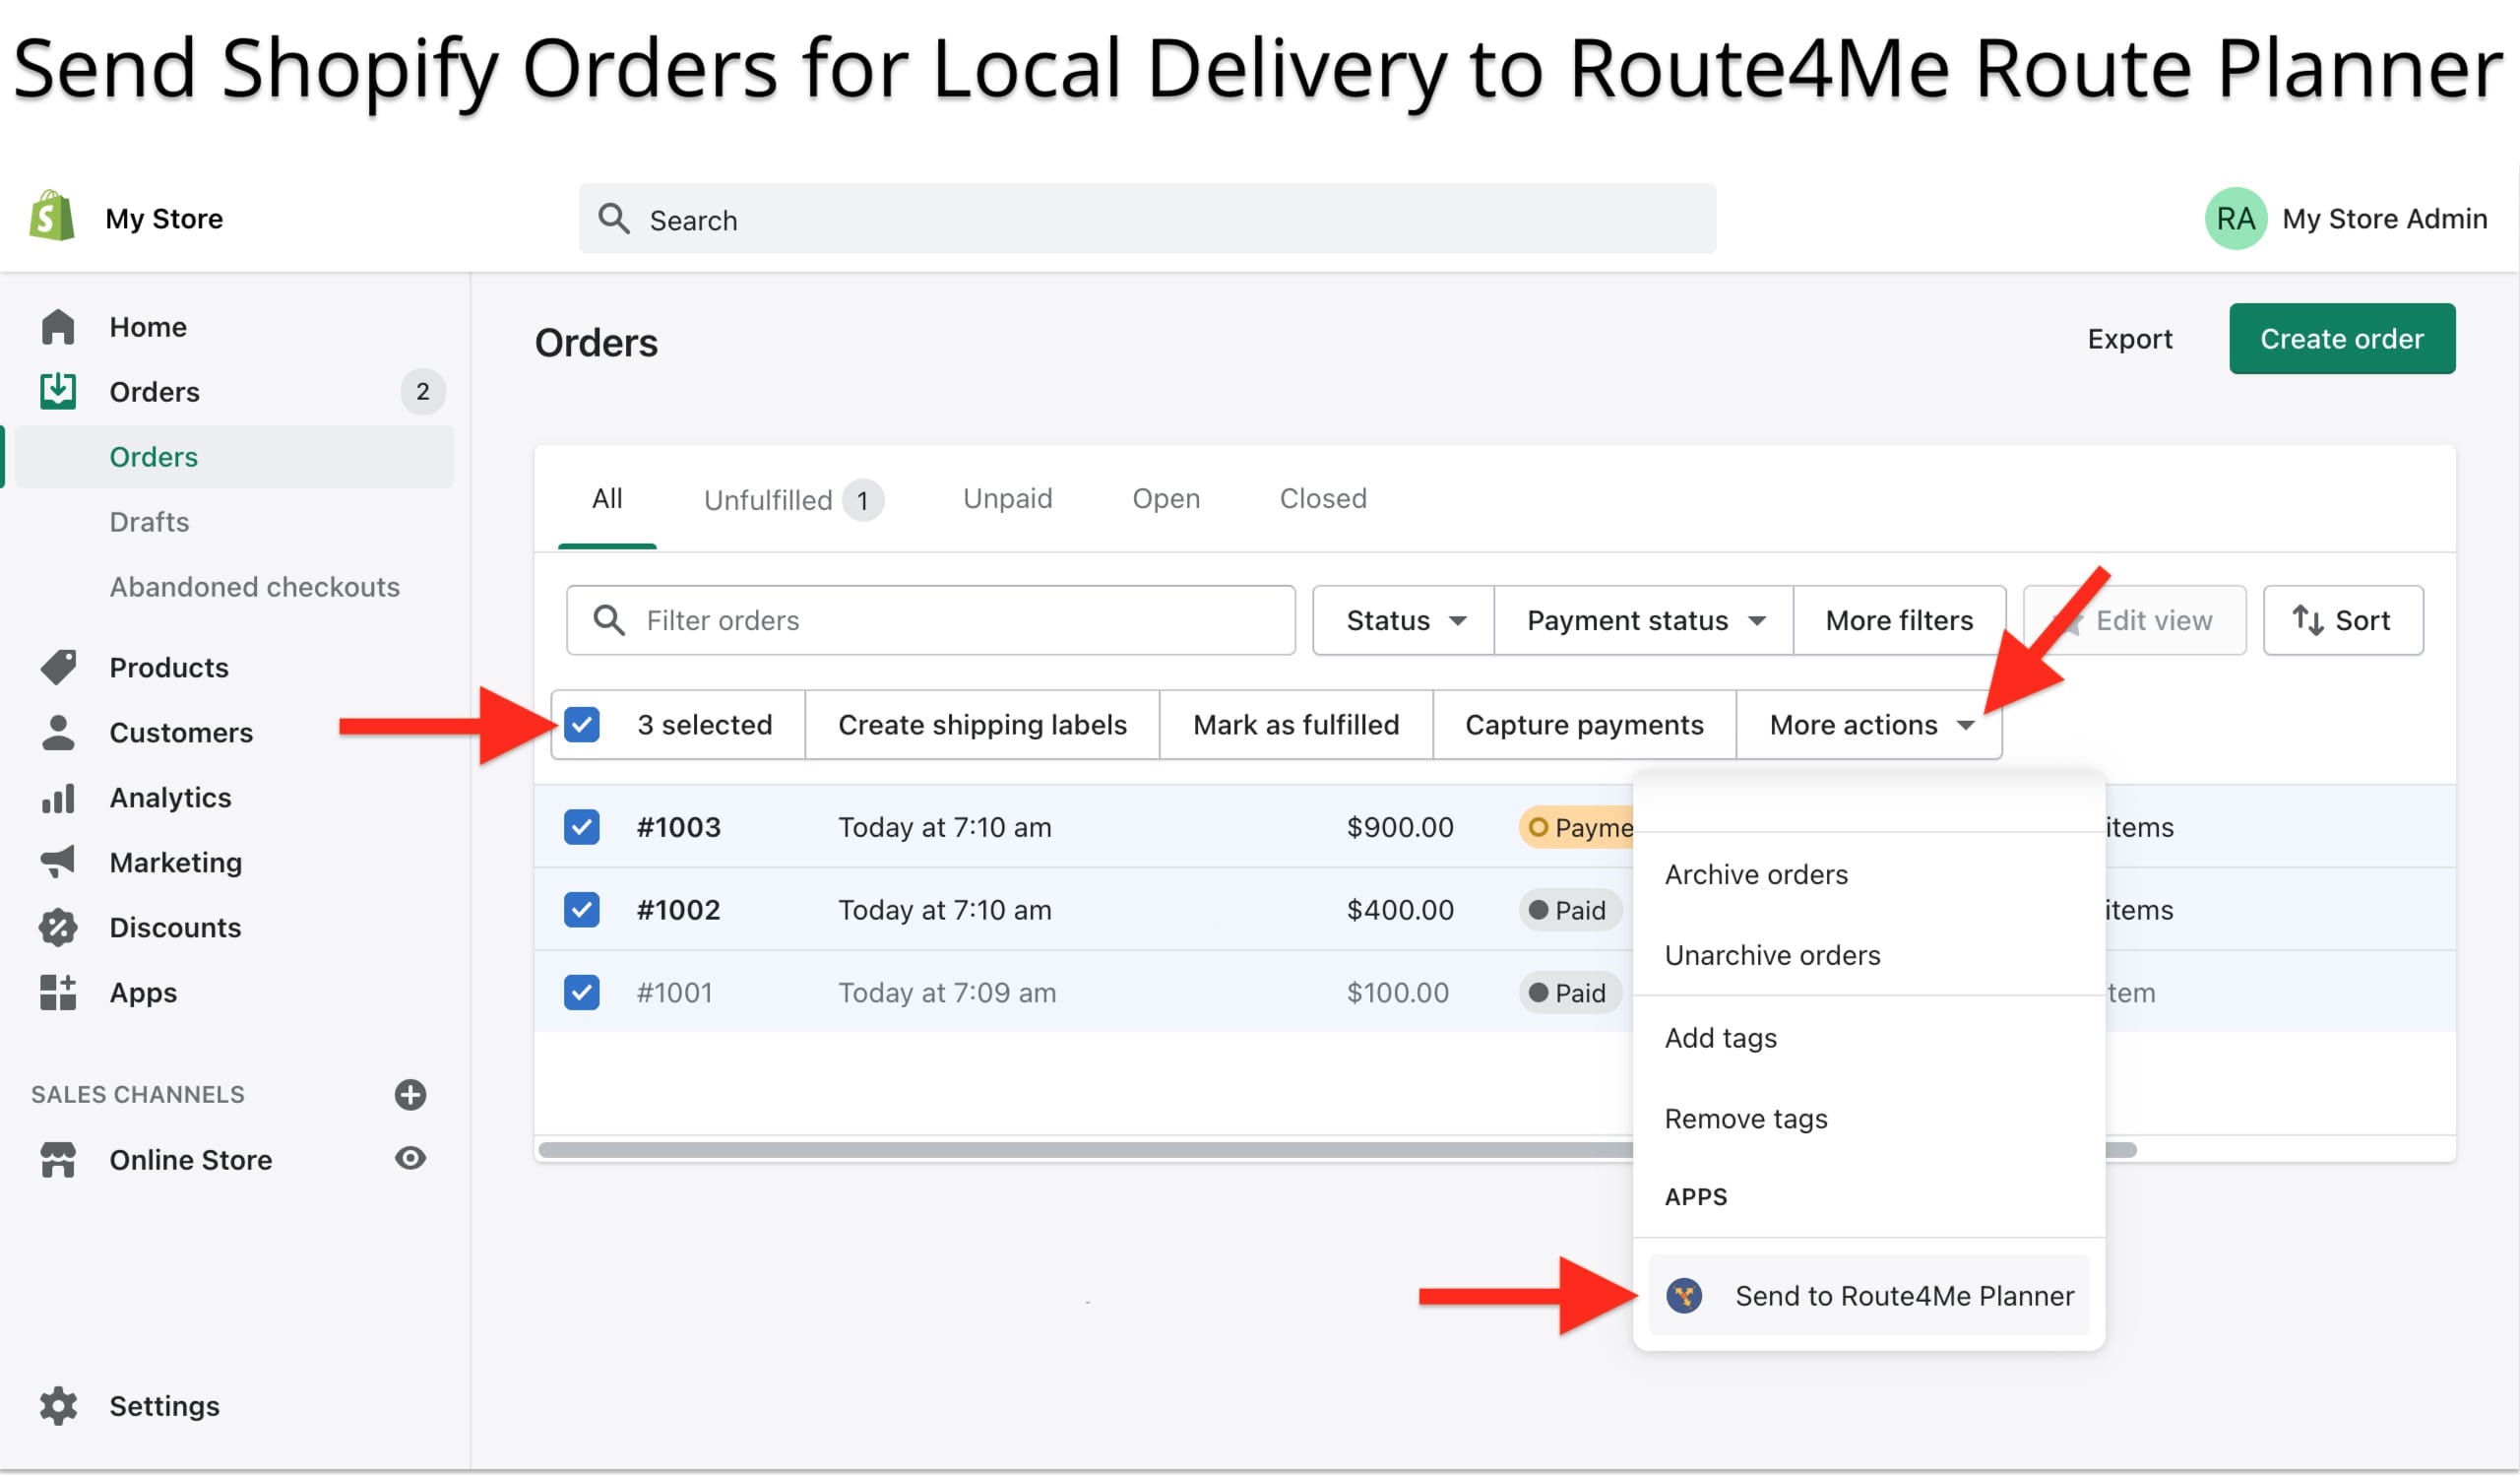 Manually send Shopify orders from your stores to the Local Delivery Route Planner app.